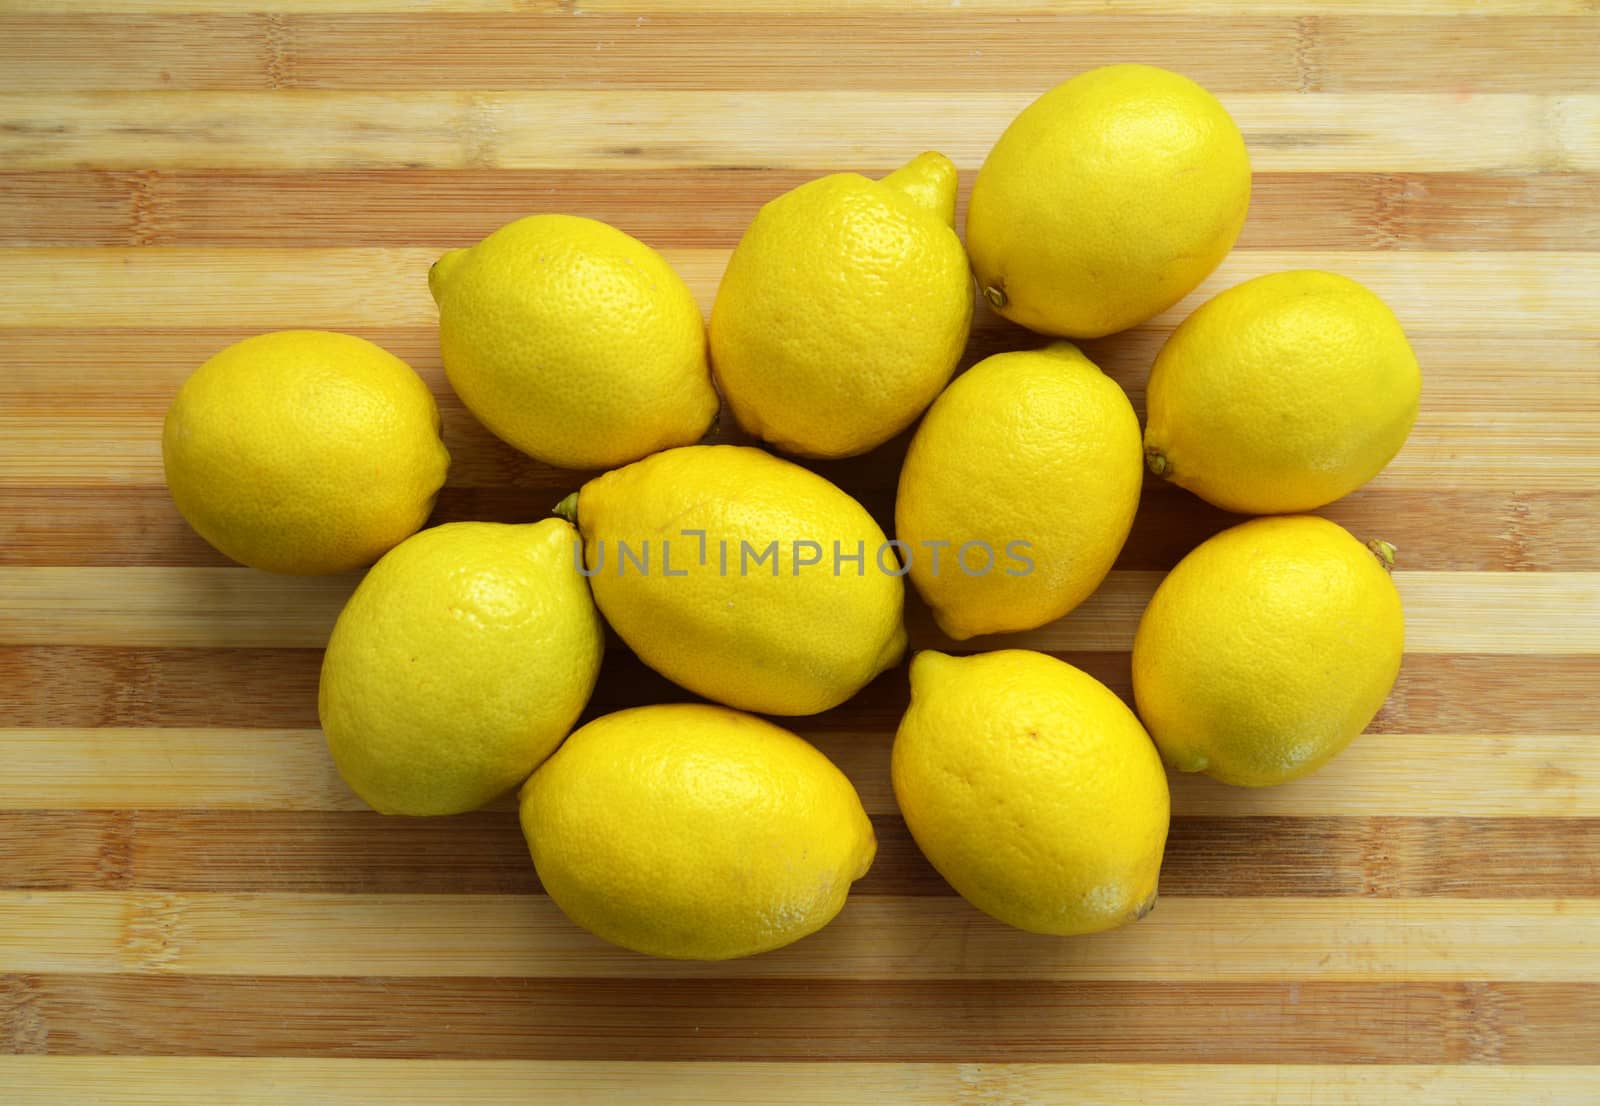 Lemon paintings on the finest wooden chopping board by nhatipoglu